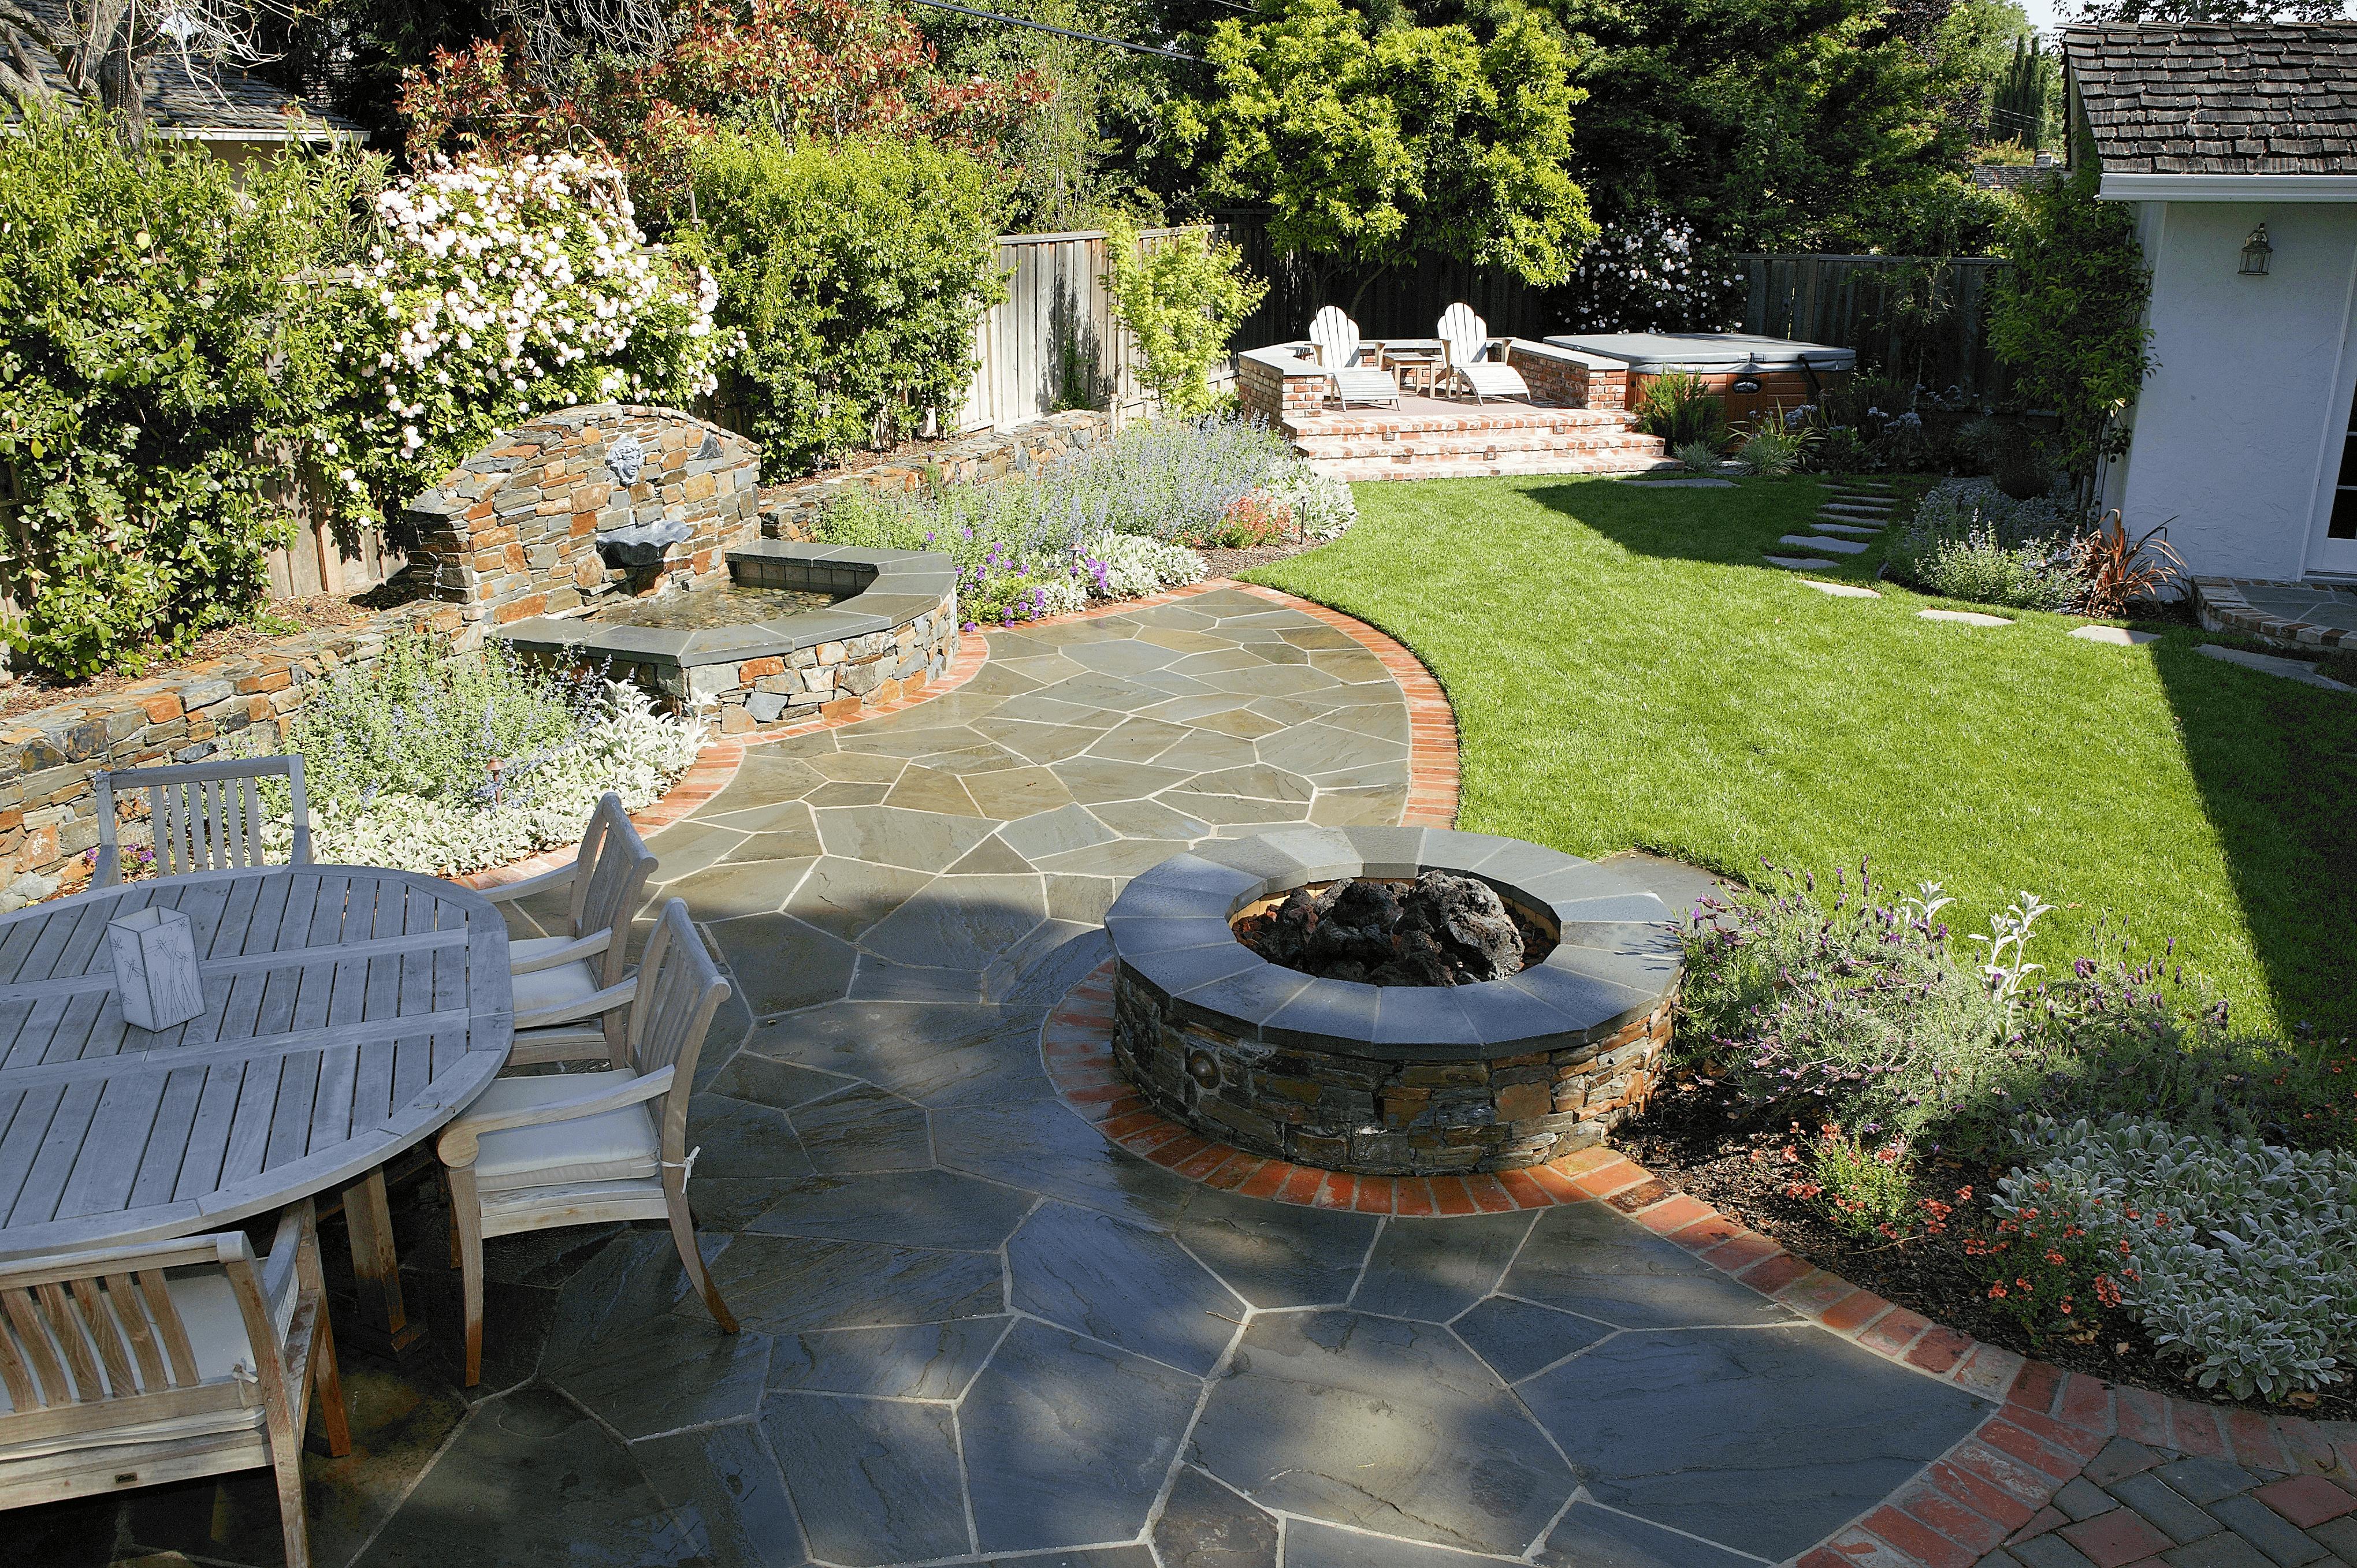 Firepit, seating area, and water feature amongst pavers and a lush lawn in a cottage-style California backyard landscape